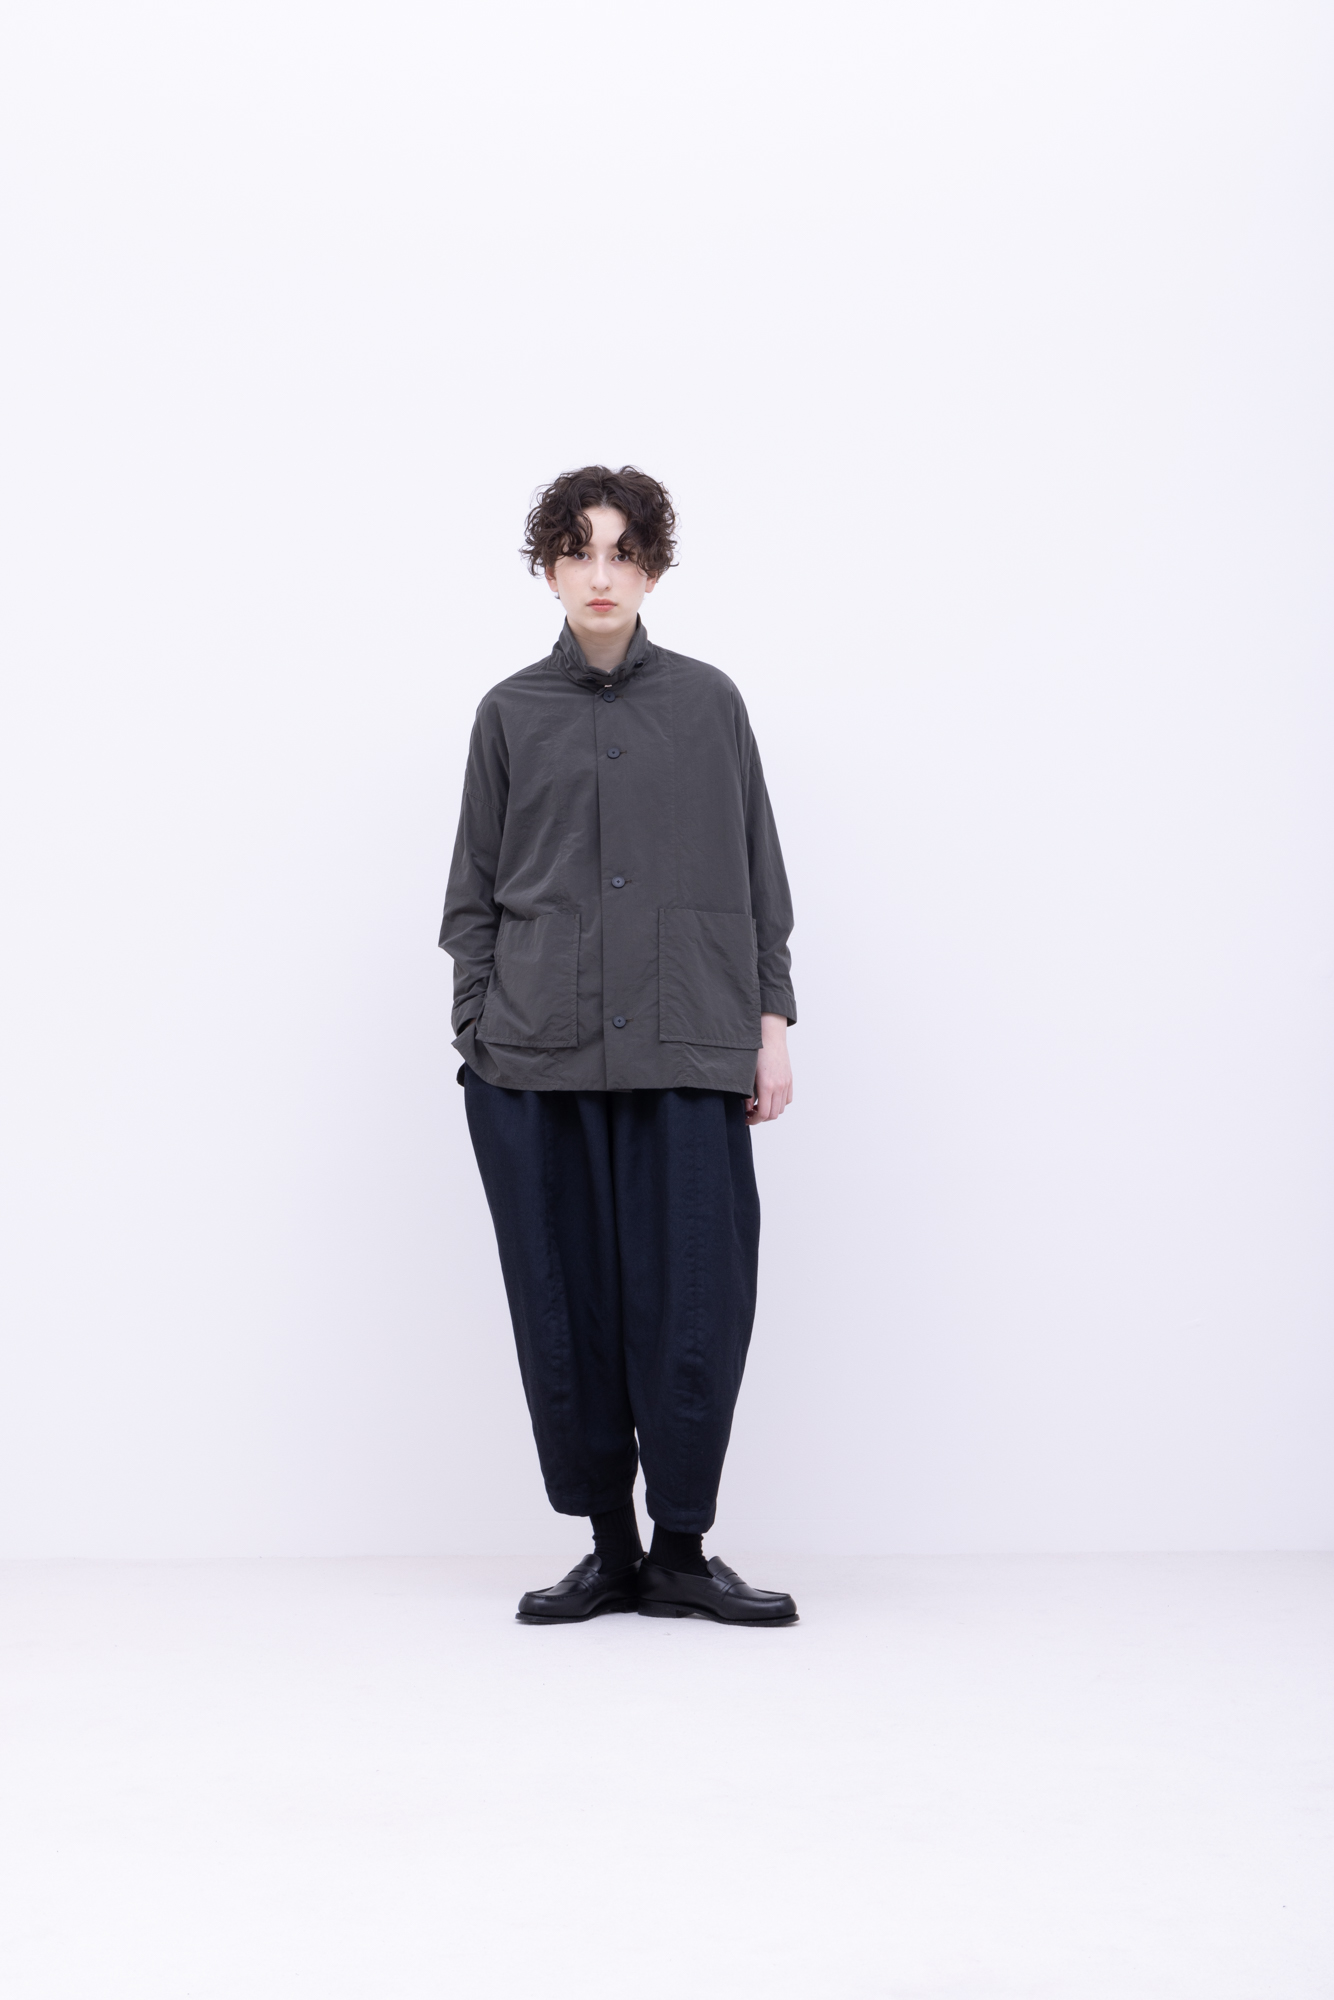 No. 022 | 2023 AW WOMENS / Model H=169cm | LOOK | FIRMUM